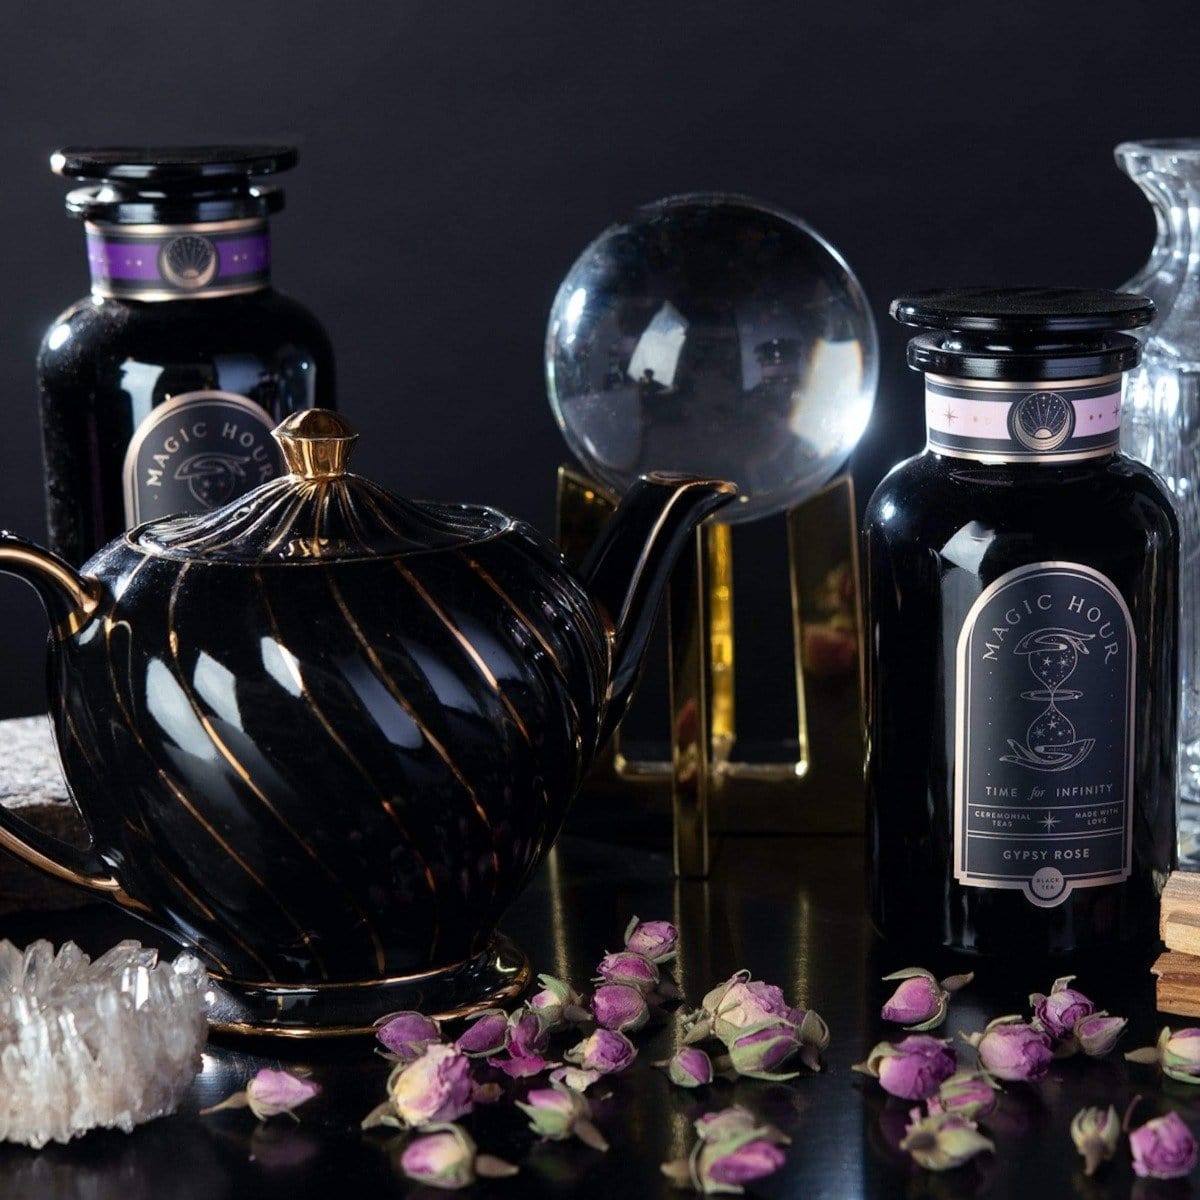 A dark, elegant display features two black jars labeled "Black Tea Magic Sampler Box- Bestselling Organic Black Teas for Energy & Vitality," a black teapot with gold accents, dried rosebuds, a crystal ball on a stand, a crystal cluster, and glassware against a dark backdrop. The scene exudes mystical and luxurious vibes with the allure of Magic Hour.